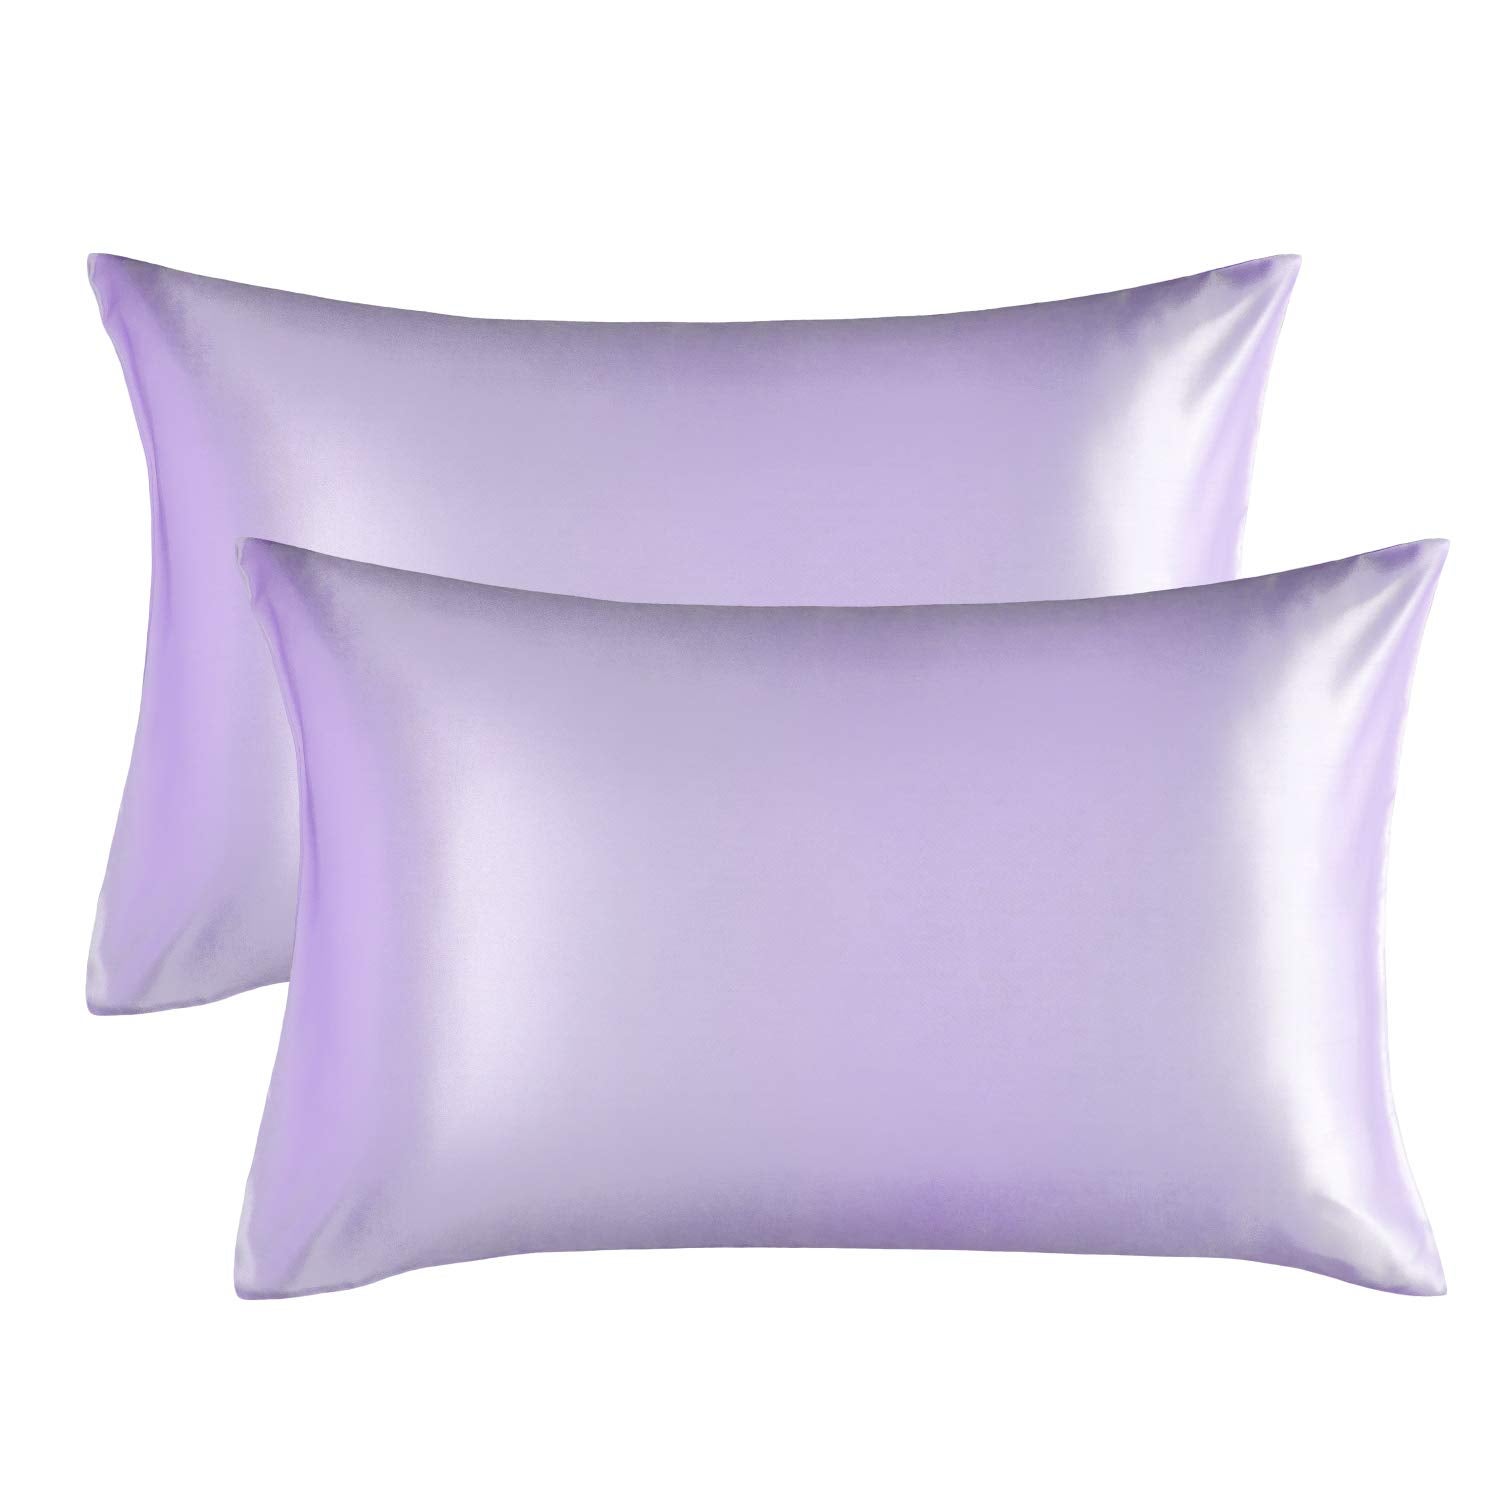 Decorative Bed Pillowcase Romantic Flower Lavender Satin Pillowcase for Hair and Skin King Size Cooling Pillow Shams Soft Pillow Cover with Envelope Closure